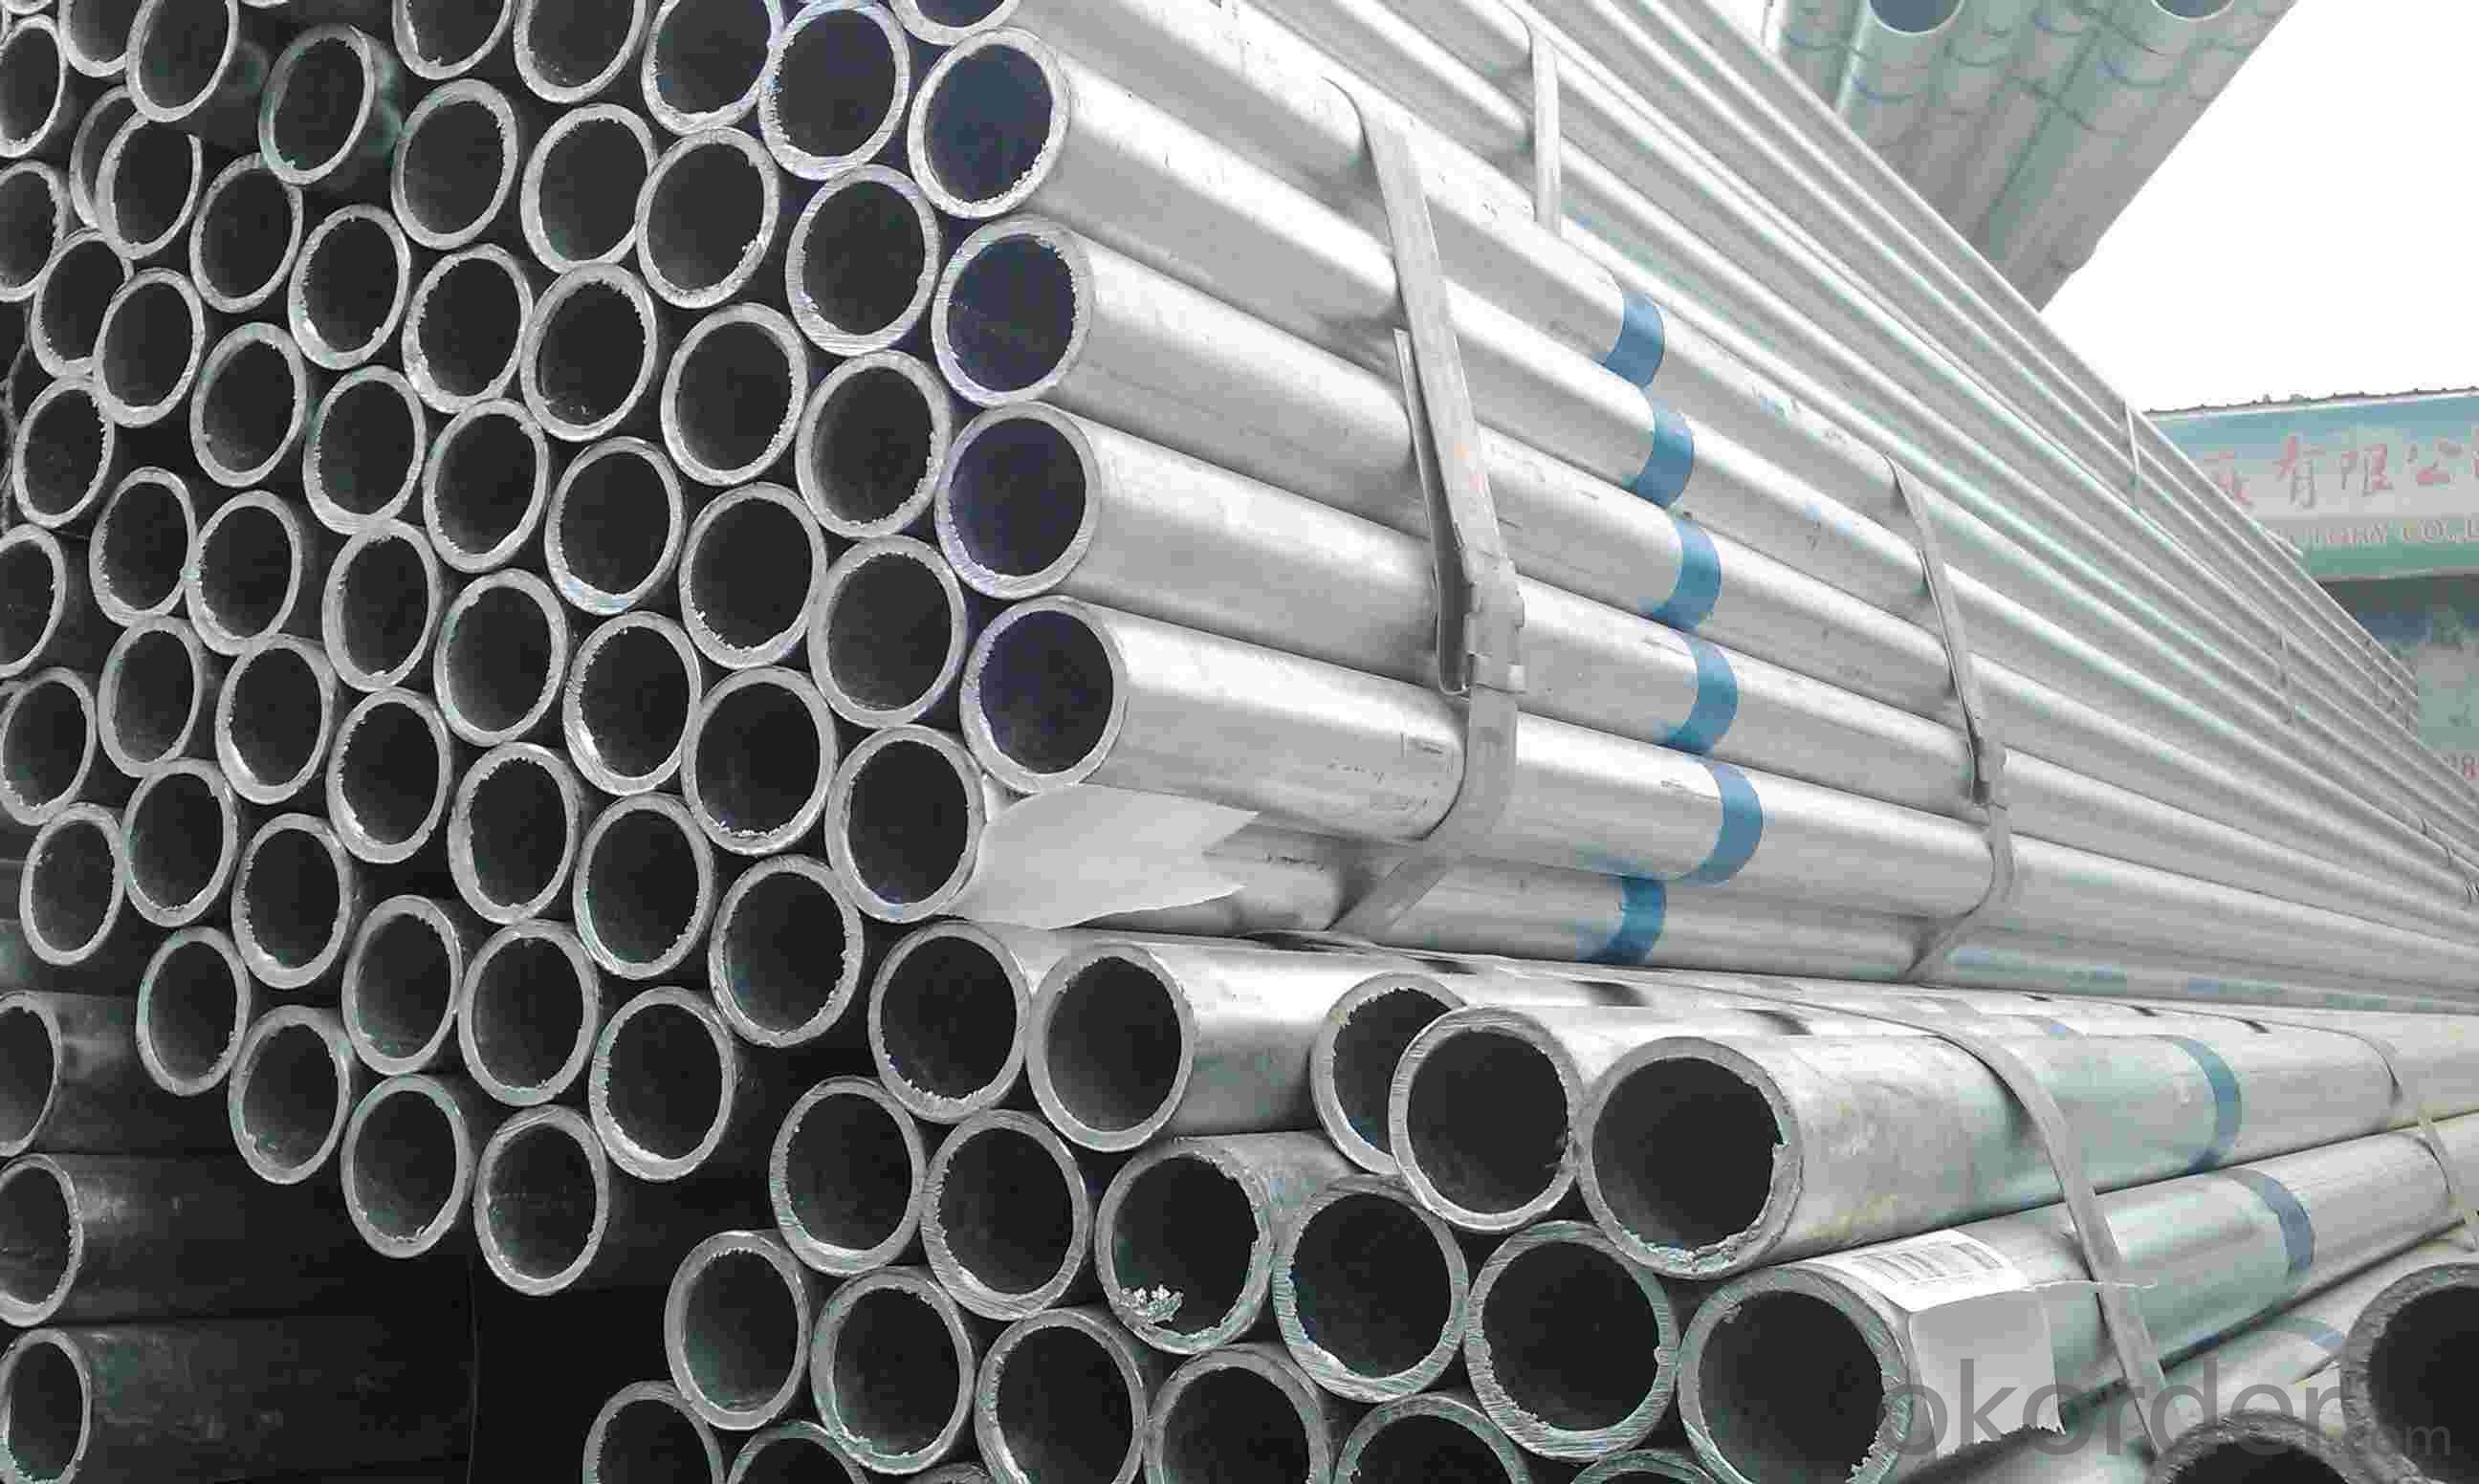 Galvanized pipe ASTM A53 100g/200g hot dipped / pre galvanized pipe